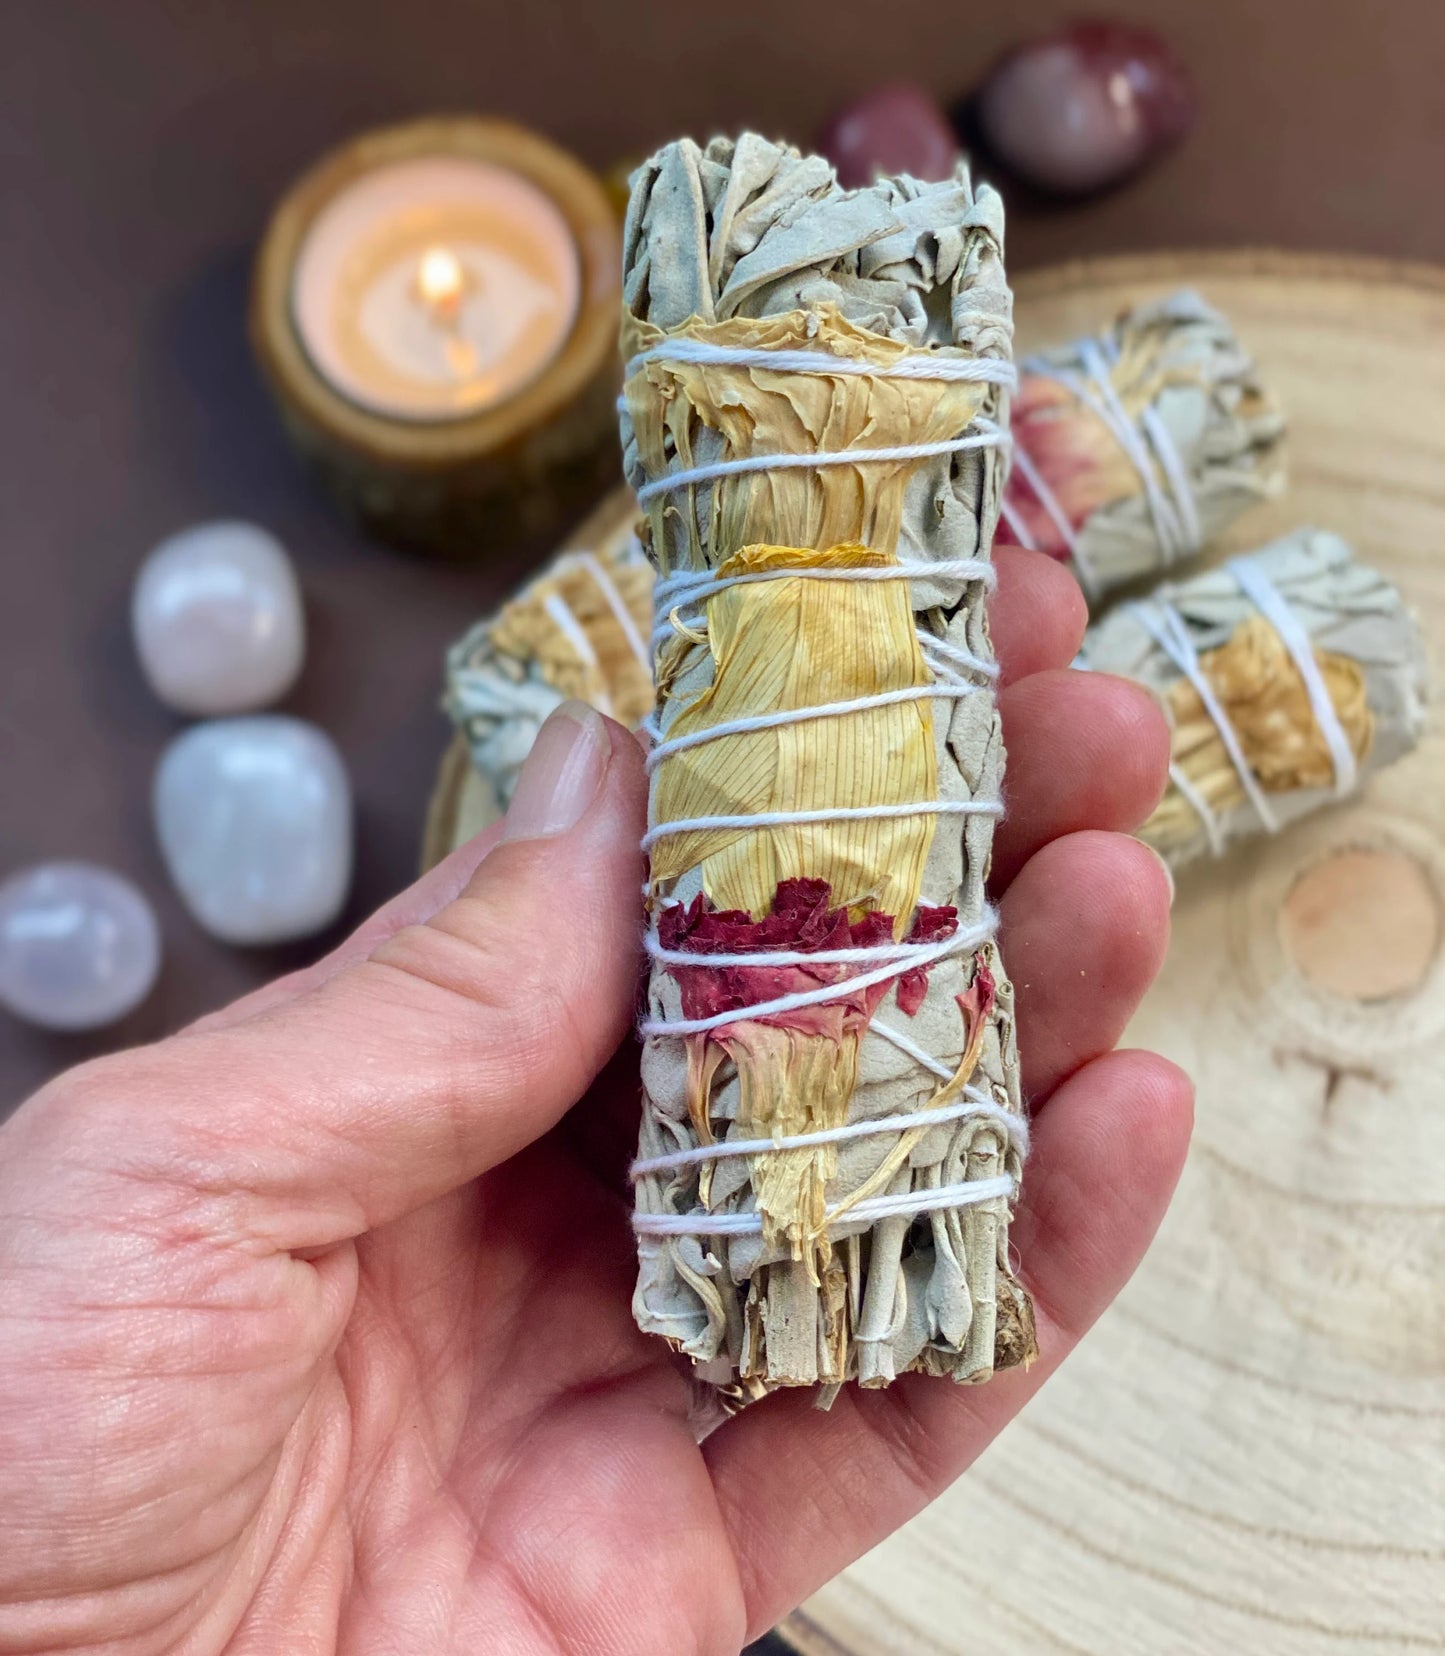 Sage Smudge Stick with Carnation petals, Cleanse your home, crystals, you, Attract love, Cleanse for protection.